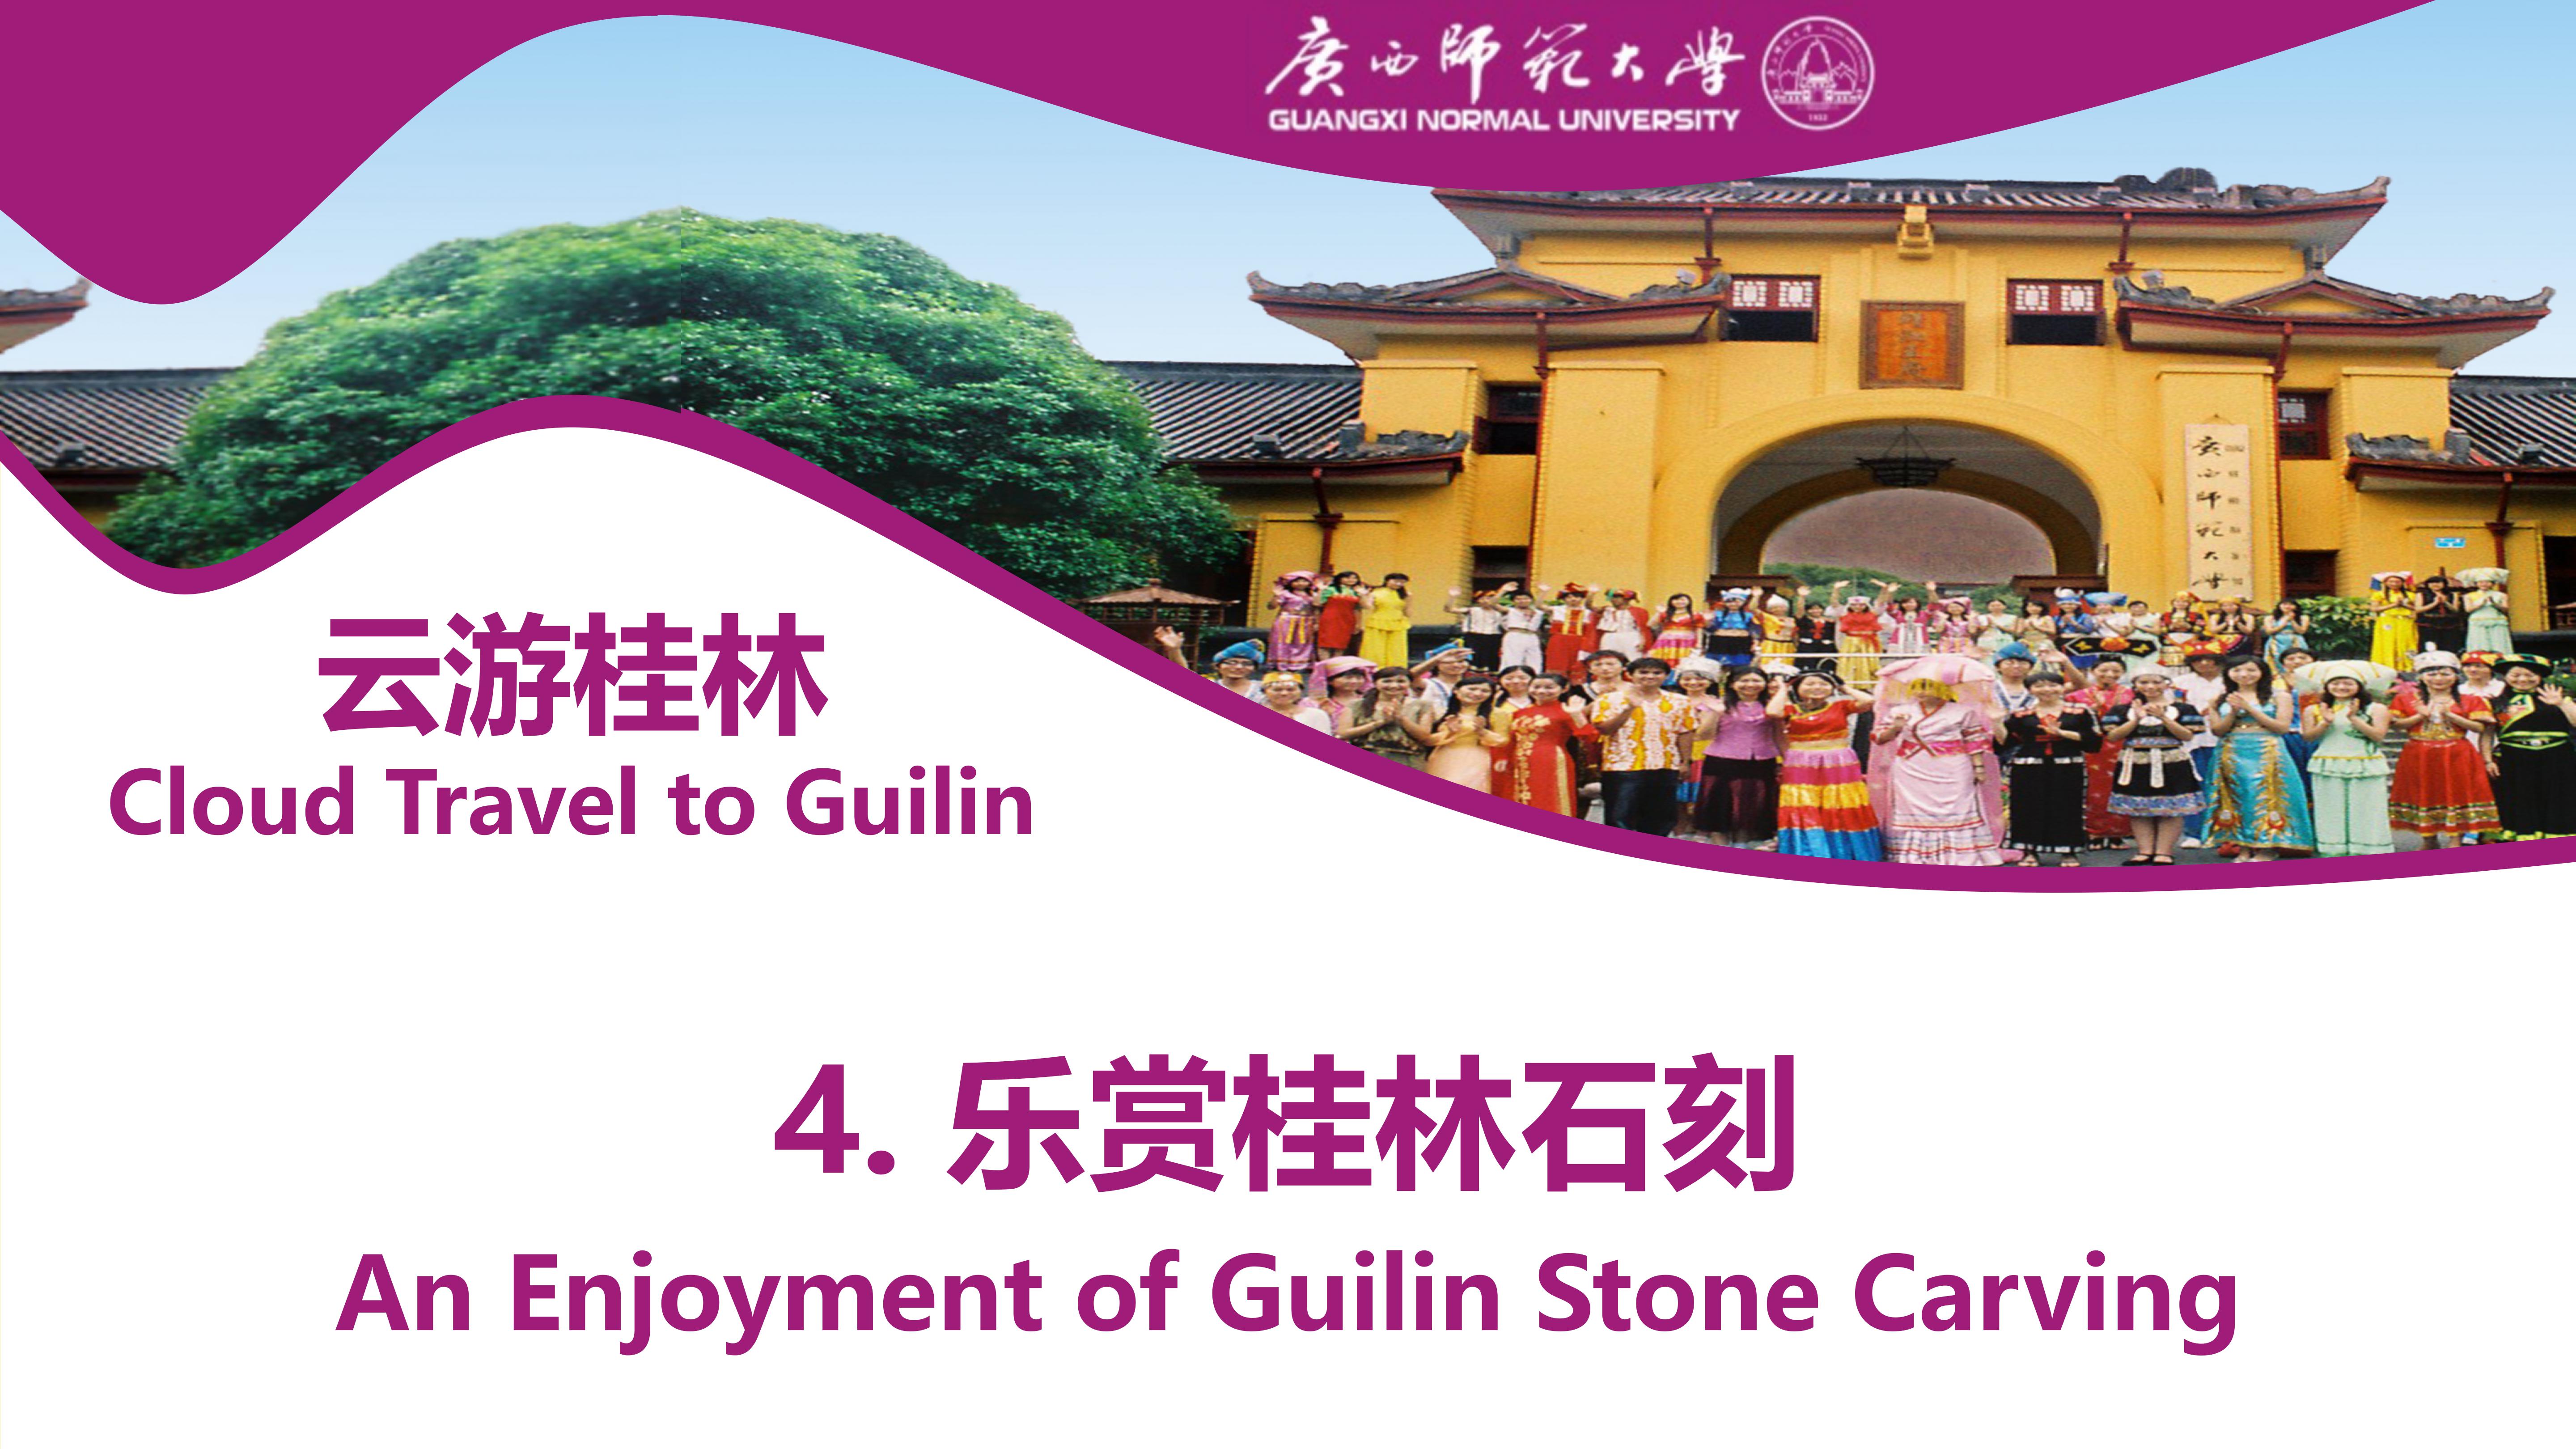 An Enjoyment of Guilin Stone Carving